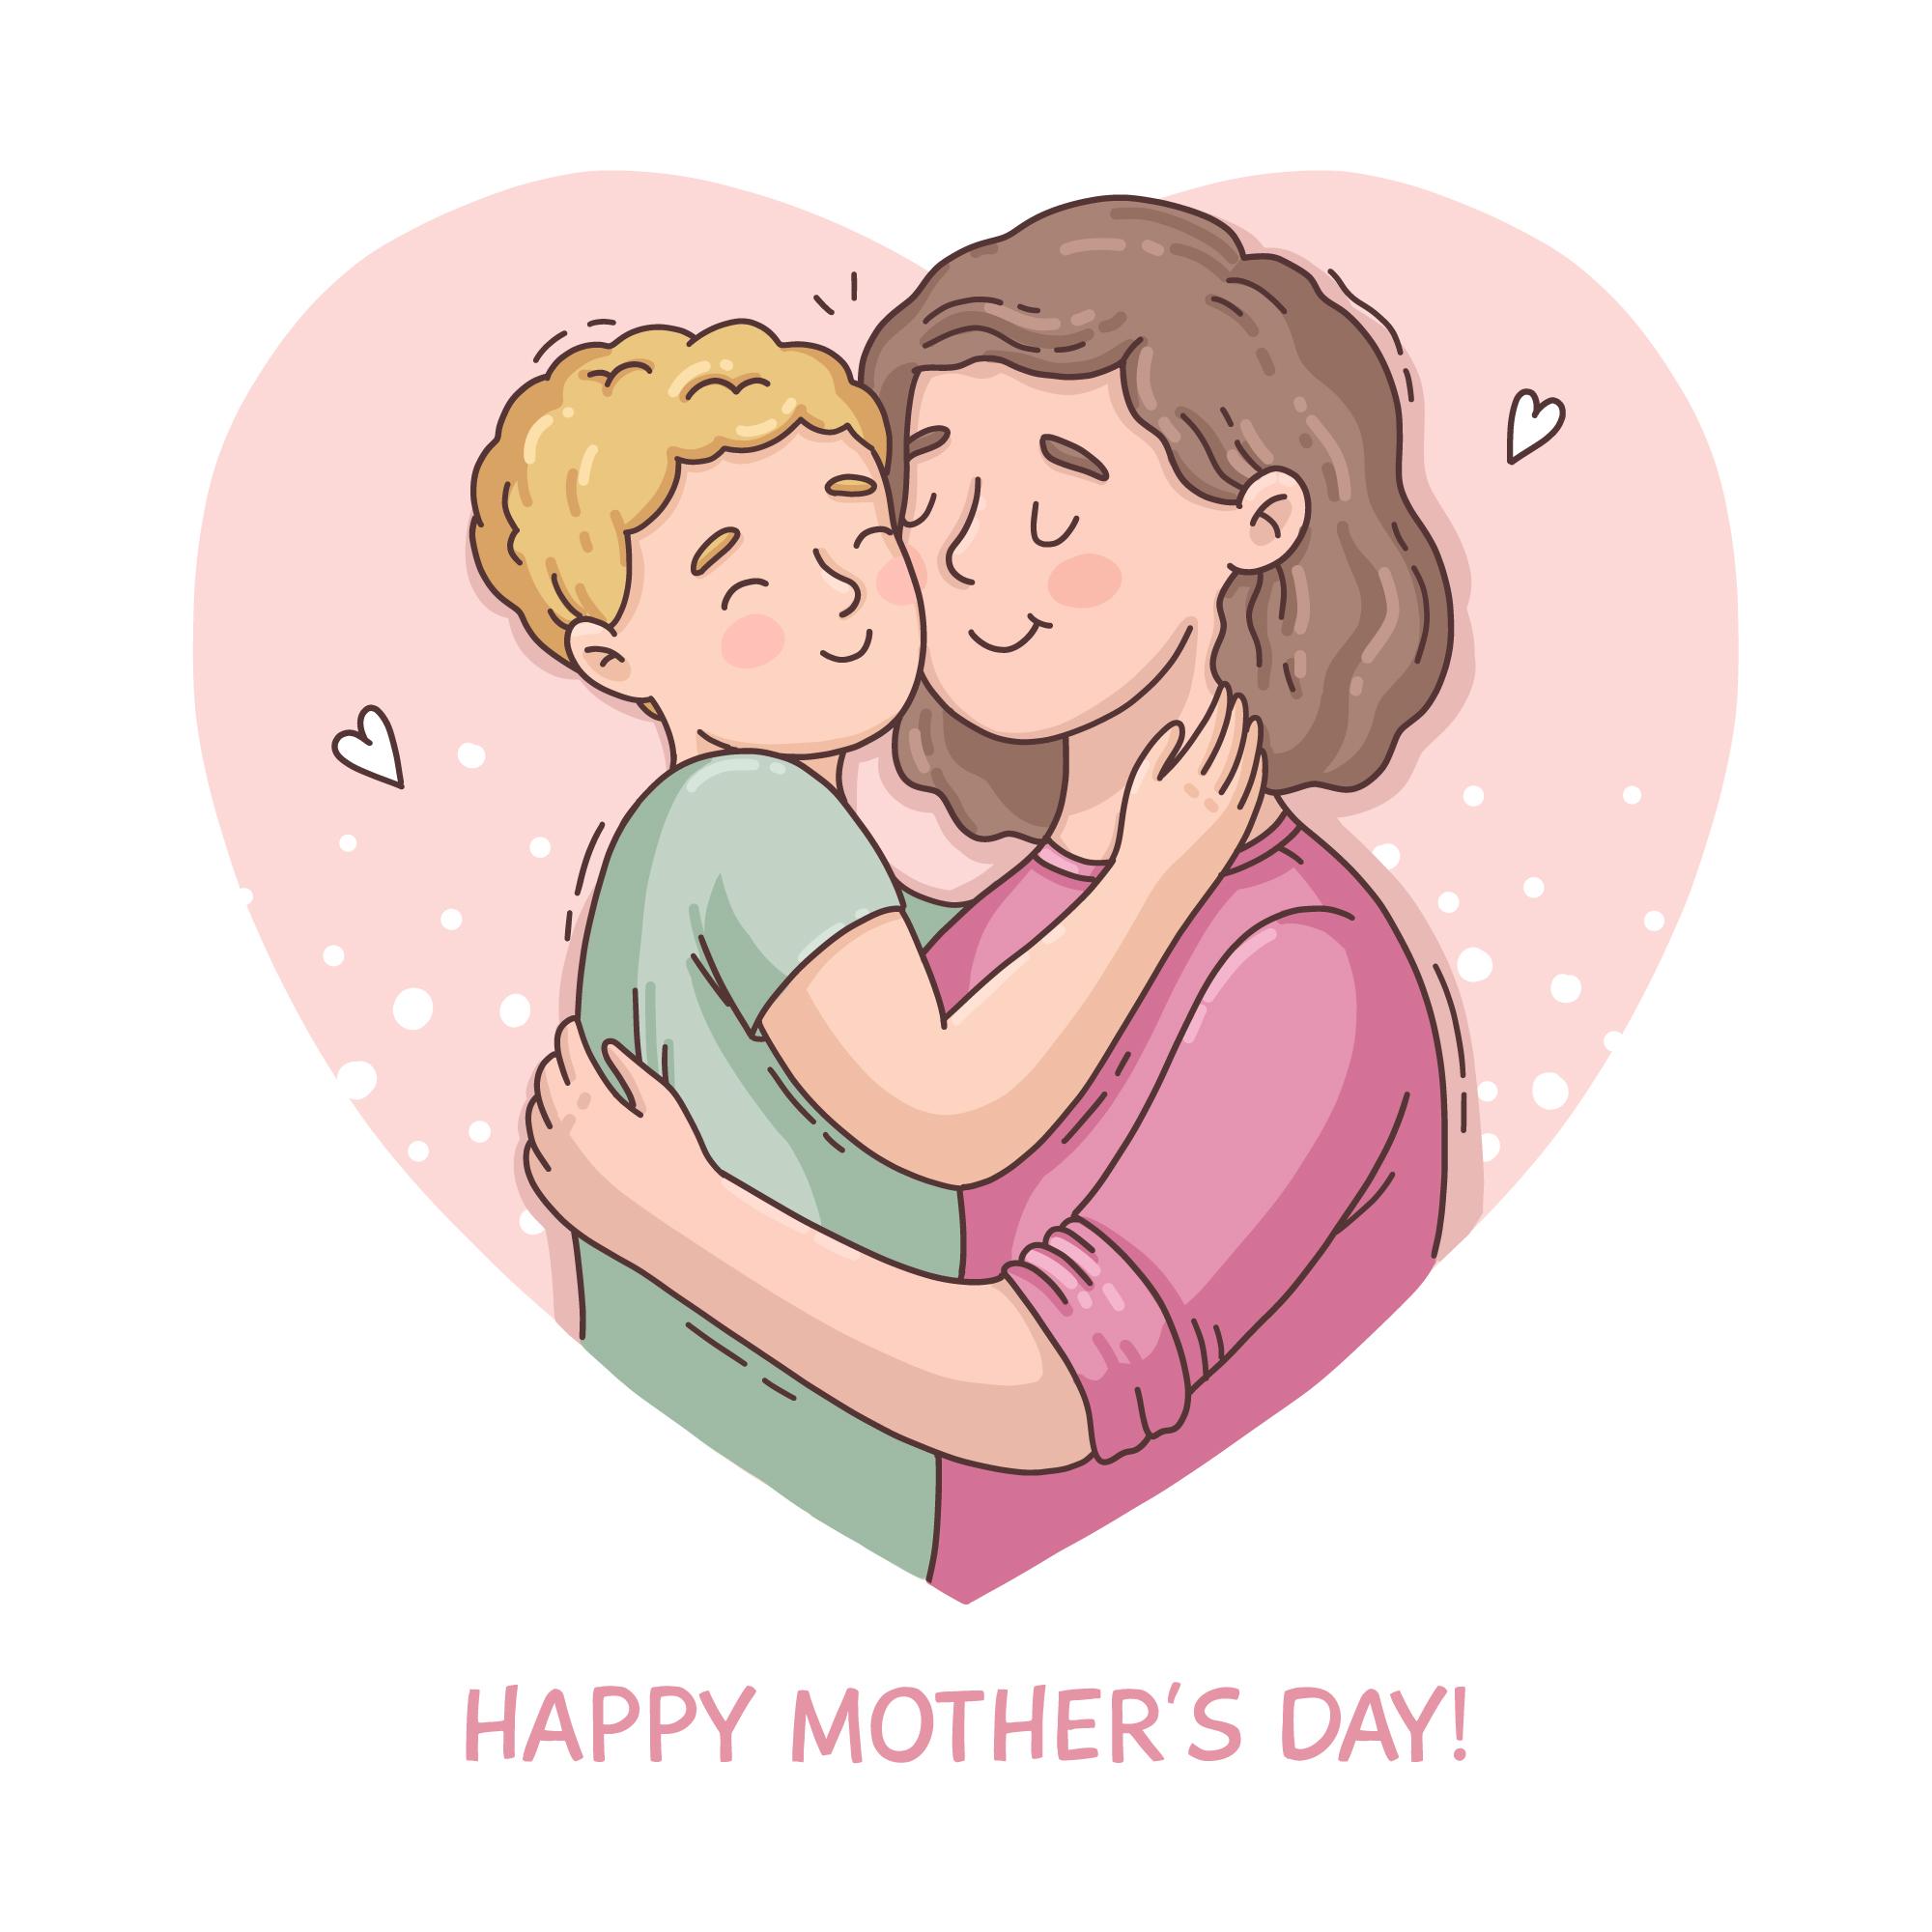 20 Mother’s Day Wishes That Will Melt Her Heart